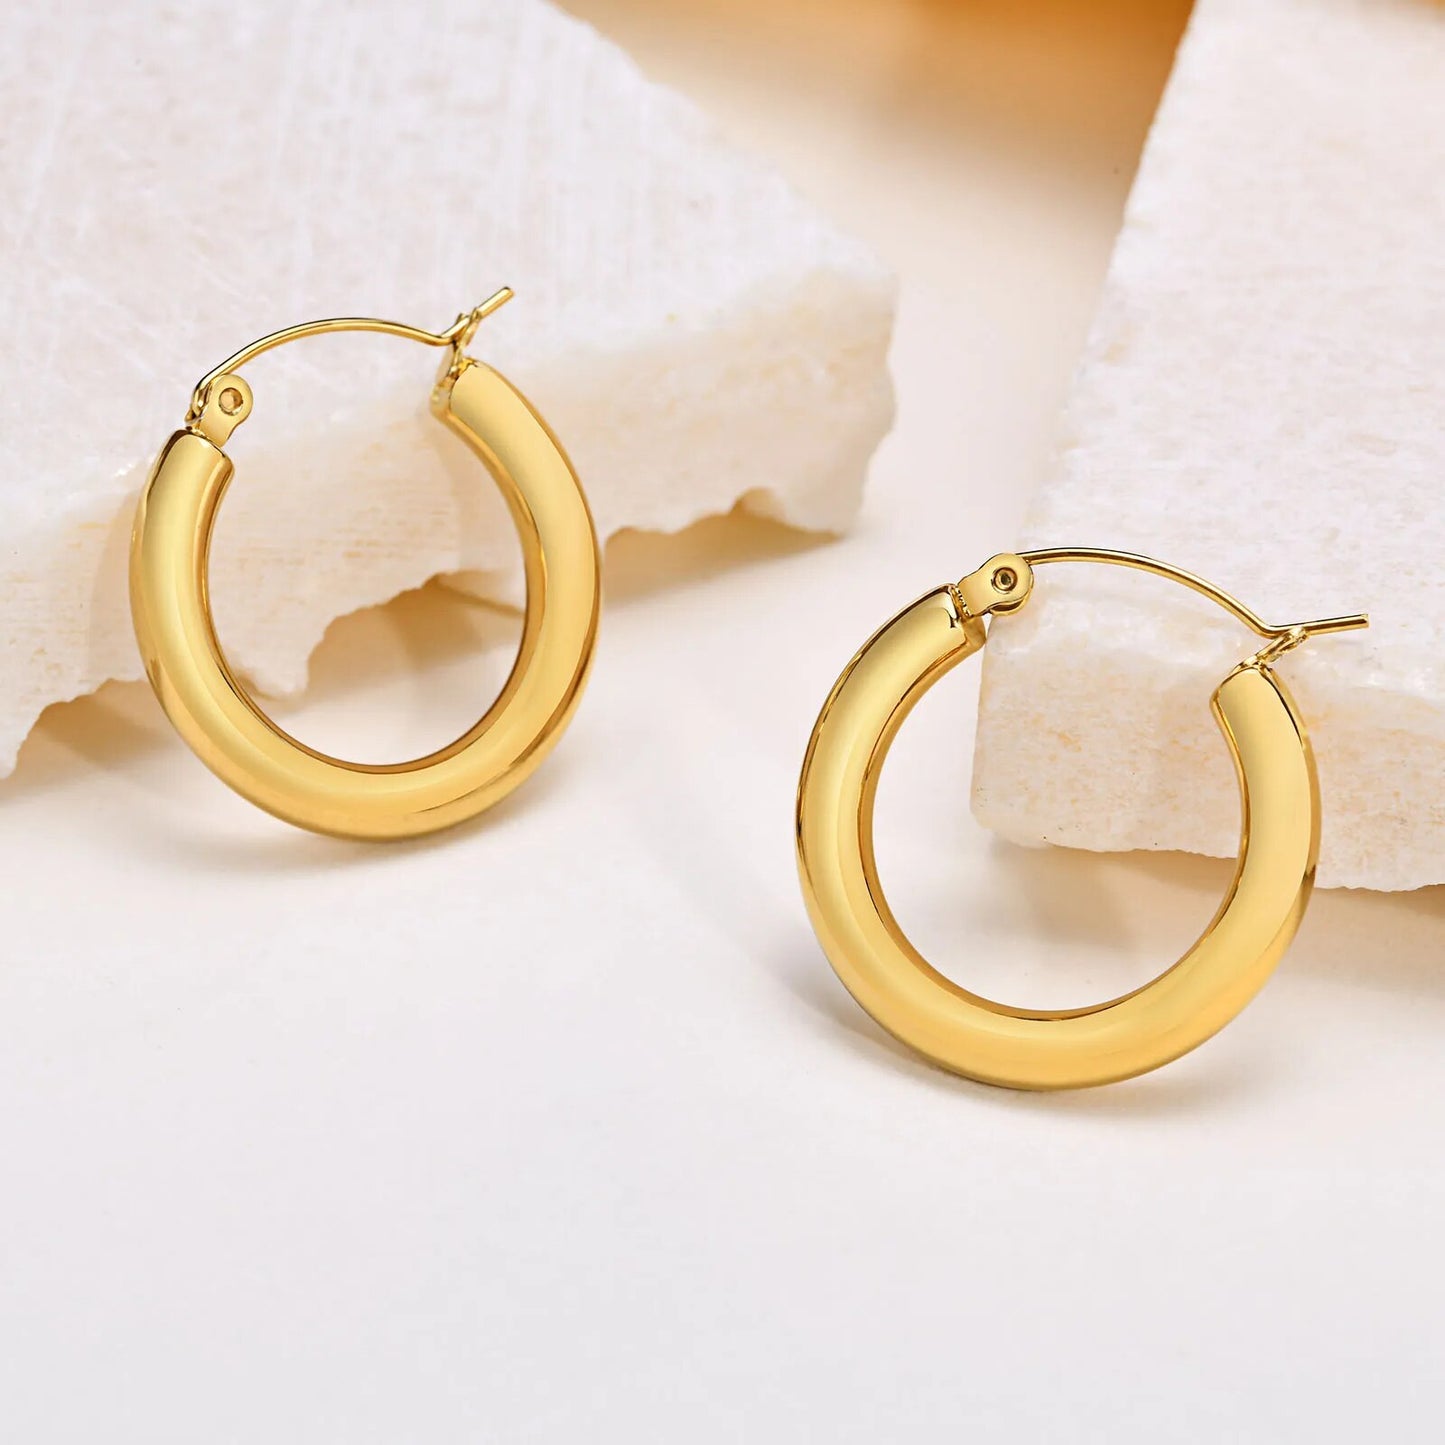 Women's Earrings Aretes para mujeres Simple Hoop Earrings for Women Lady Party Gifts Jewelry, High Polished Gold Color Stainless Steel Earring Accessories